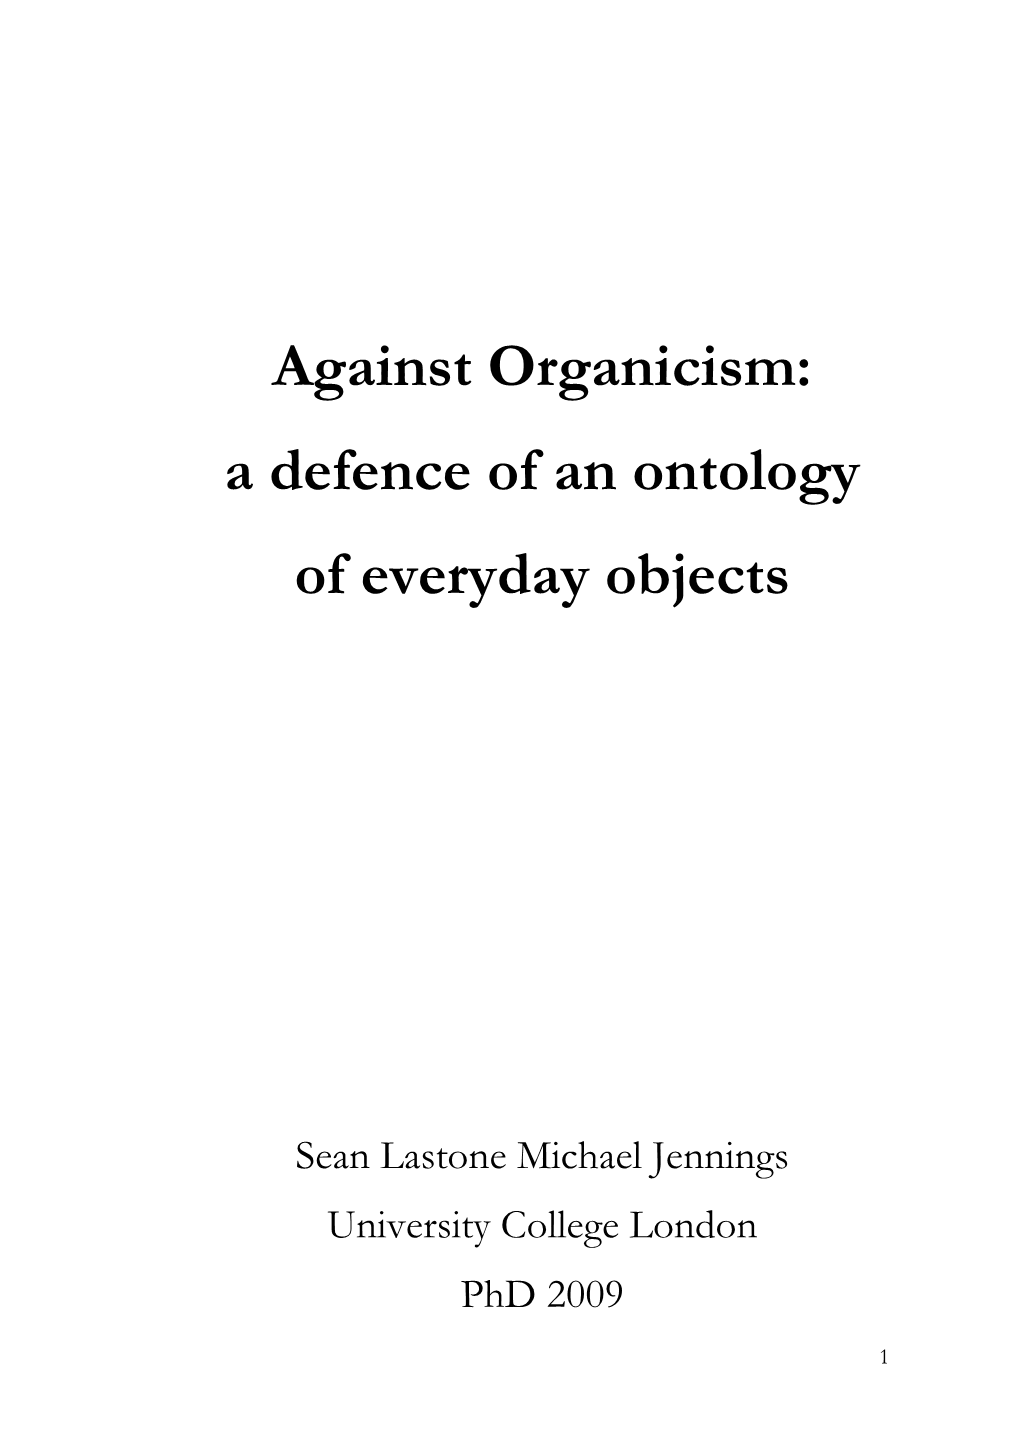 Against Organicism: a Defence of an Ontology of Everyday Objects